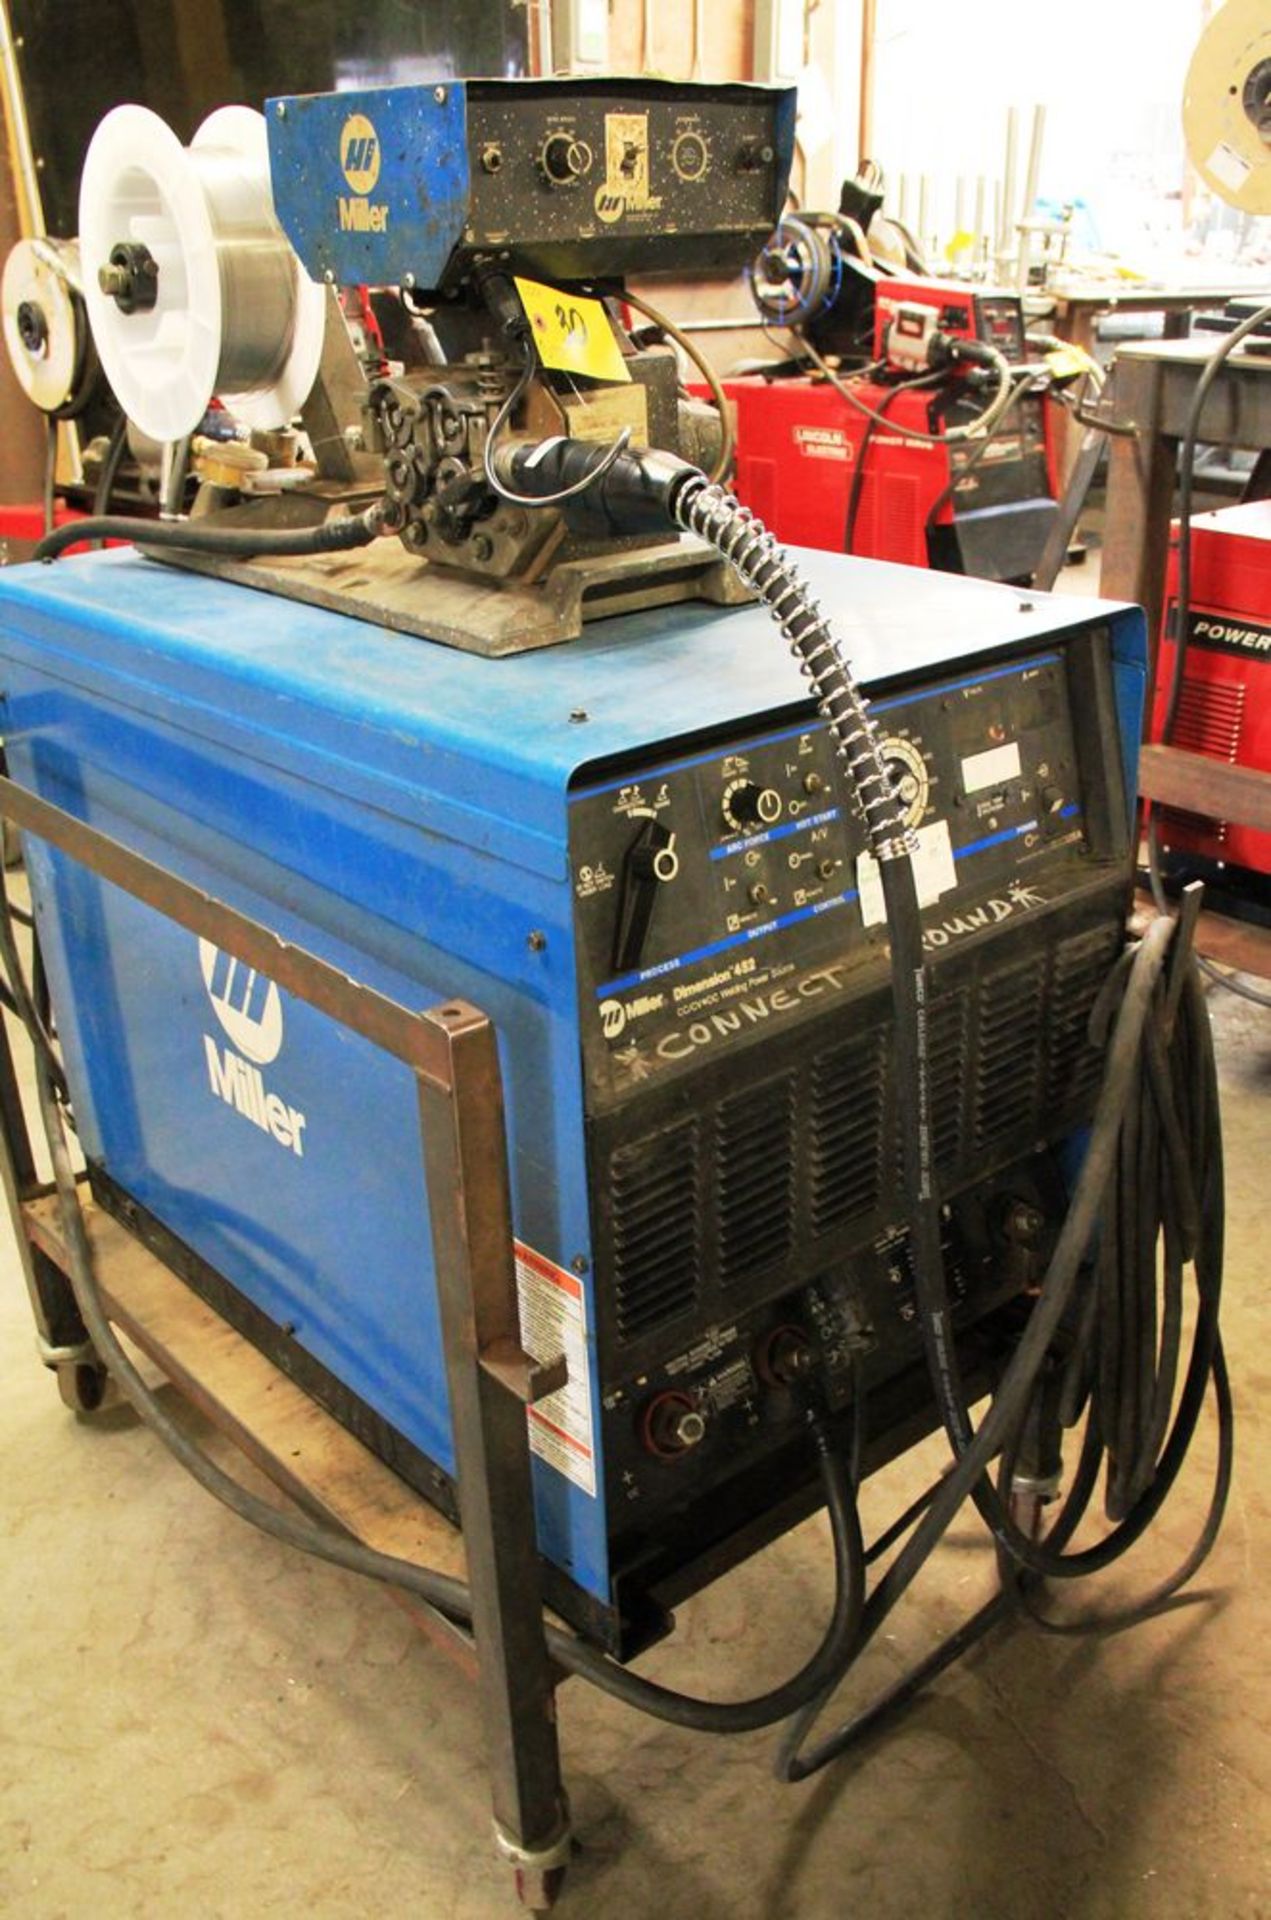 MILLER DIMENSION 452 ELECTRIC WELDER, DIGITAL READ-OUT, MILLER S-54E WIRE FEEDER MOUNTED ON CART, - Image 2 of 3